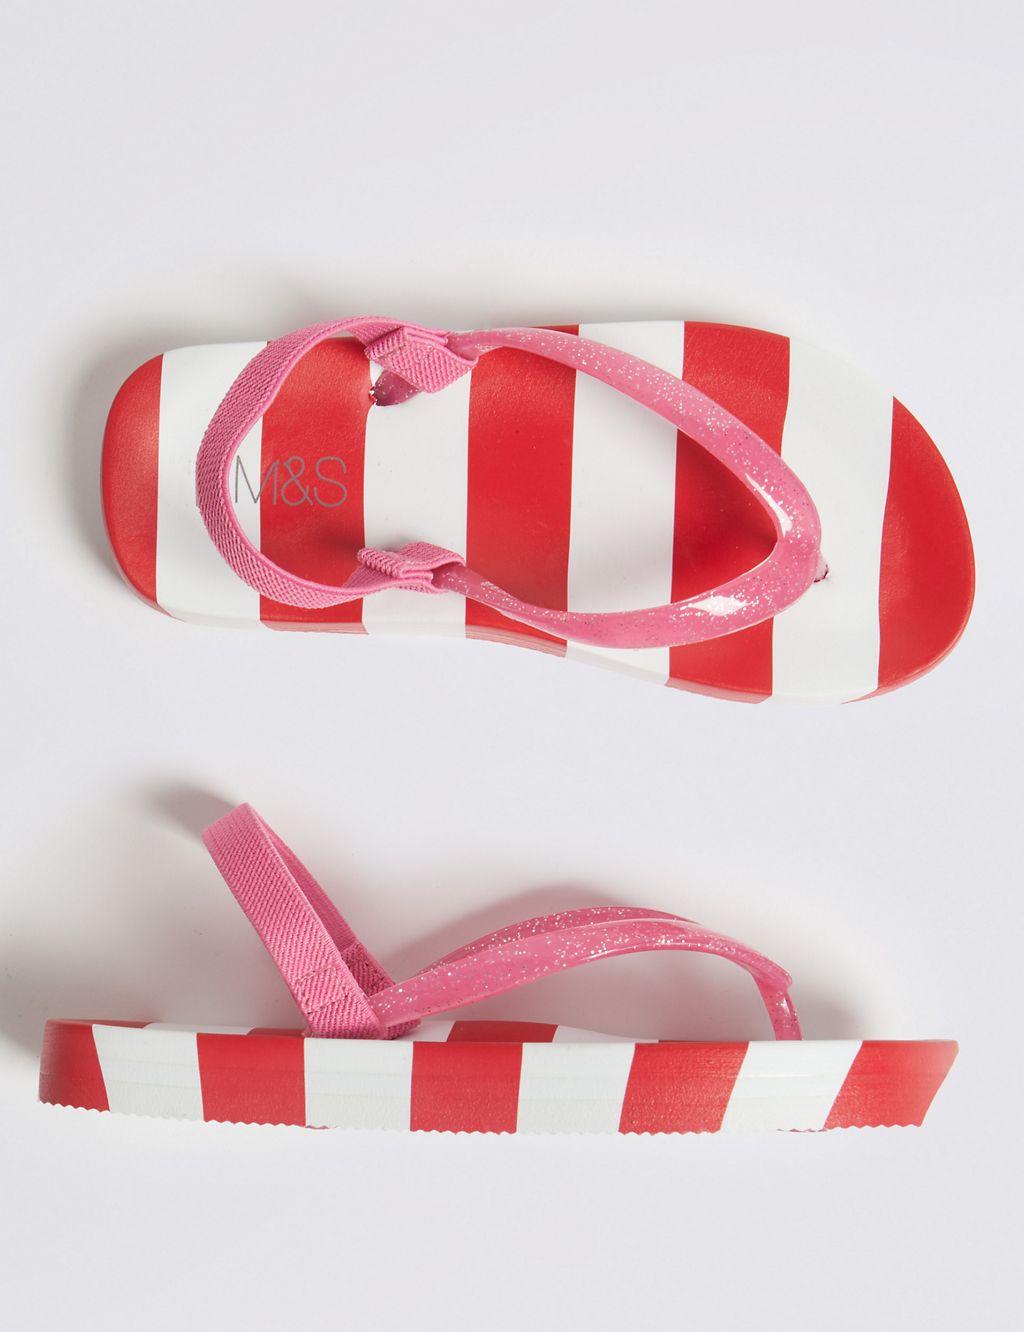 Kids’ Striped Flip-flops (5 Small - 12 Small) 1 of 5